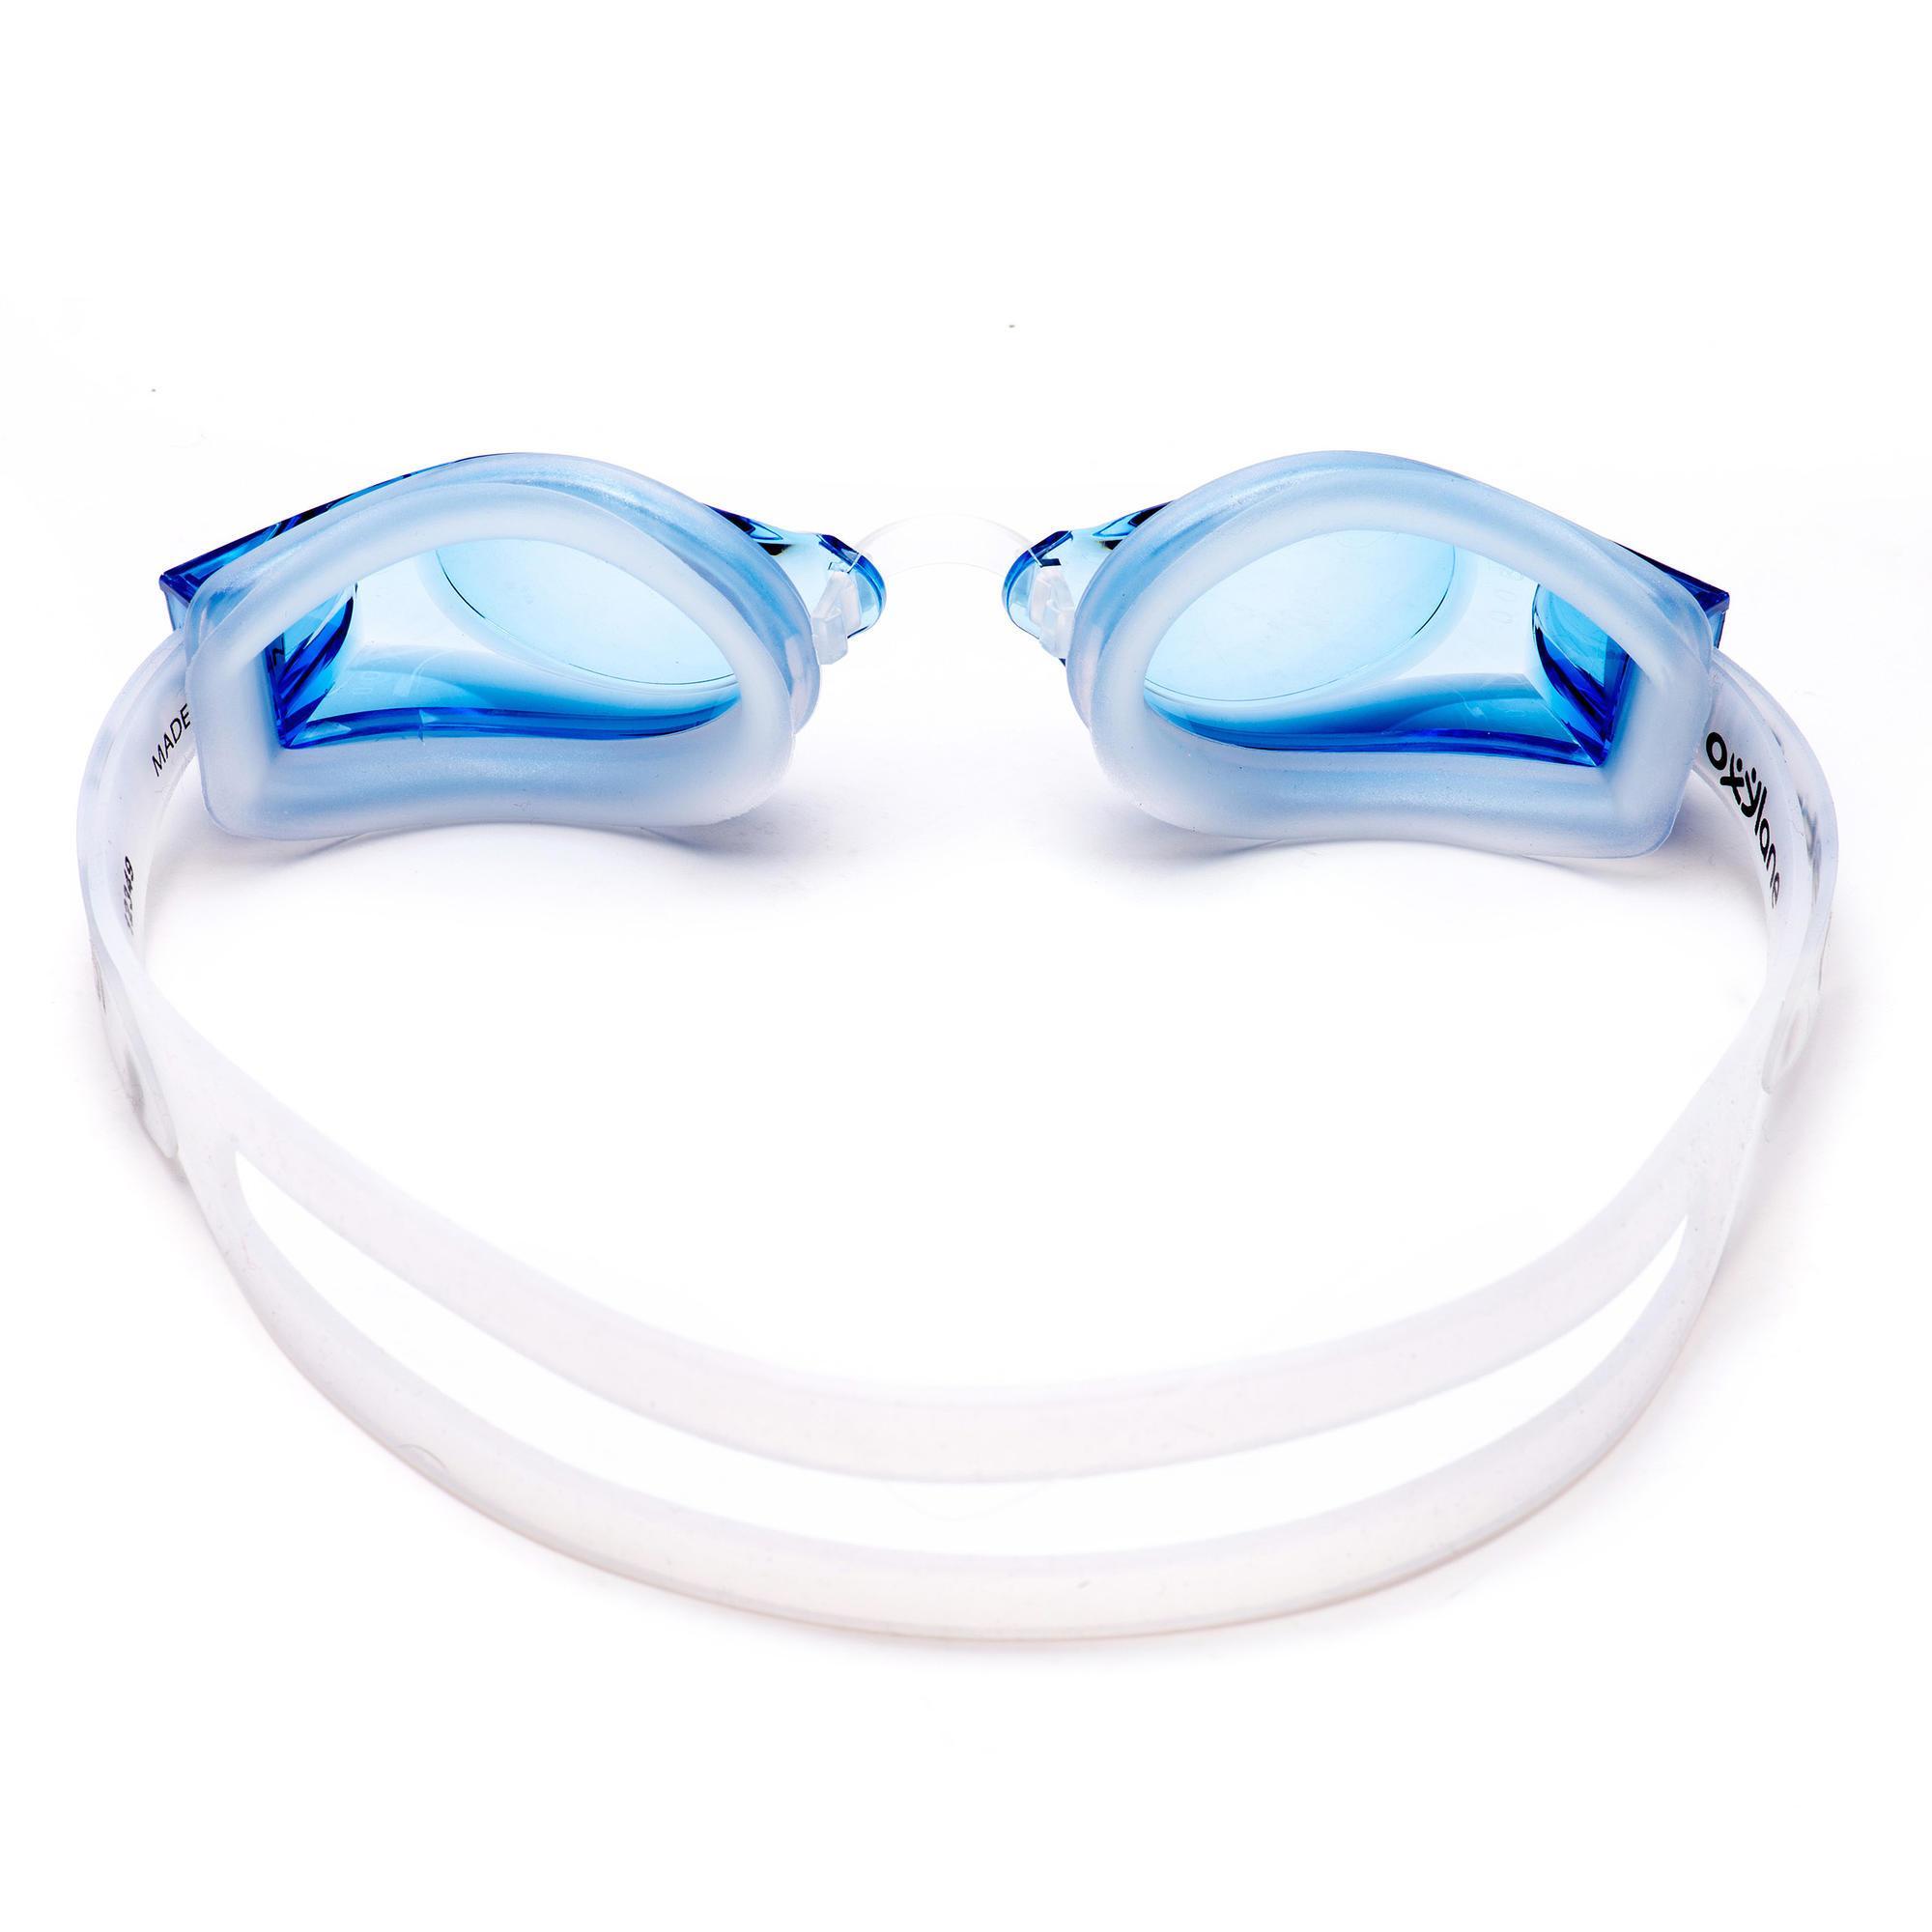 decathlon swimming goggles with power